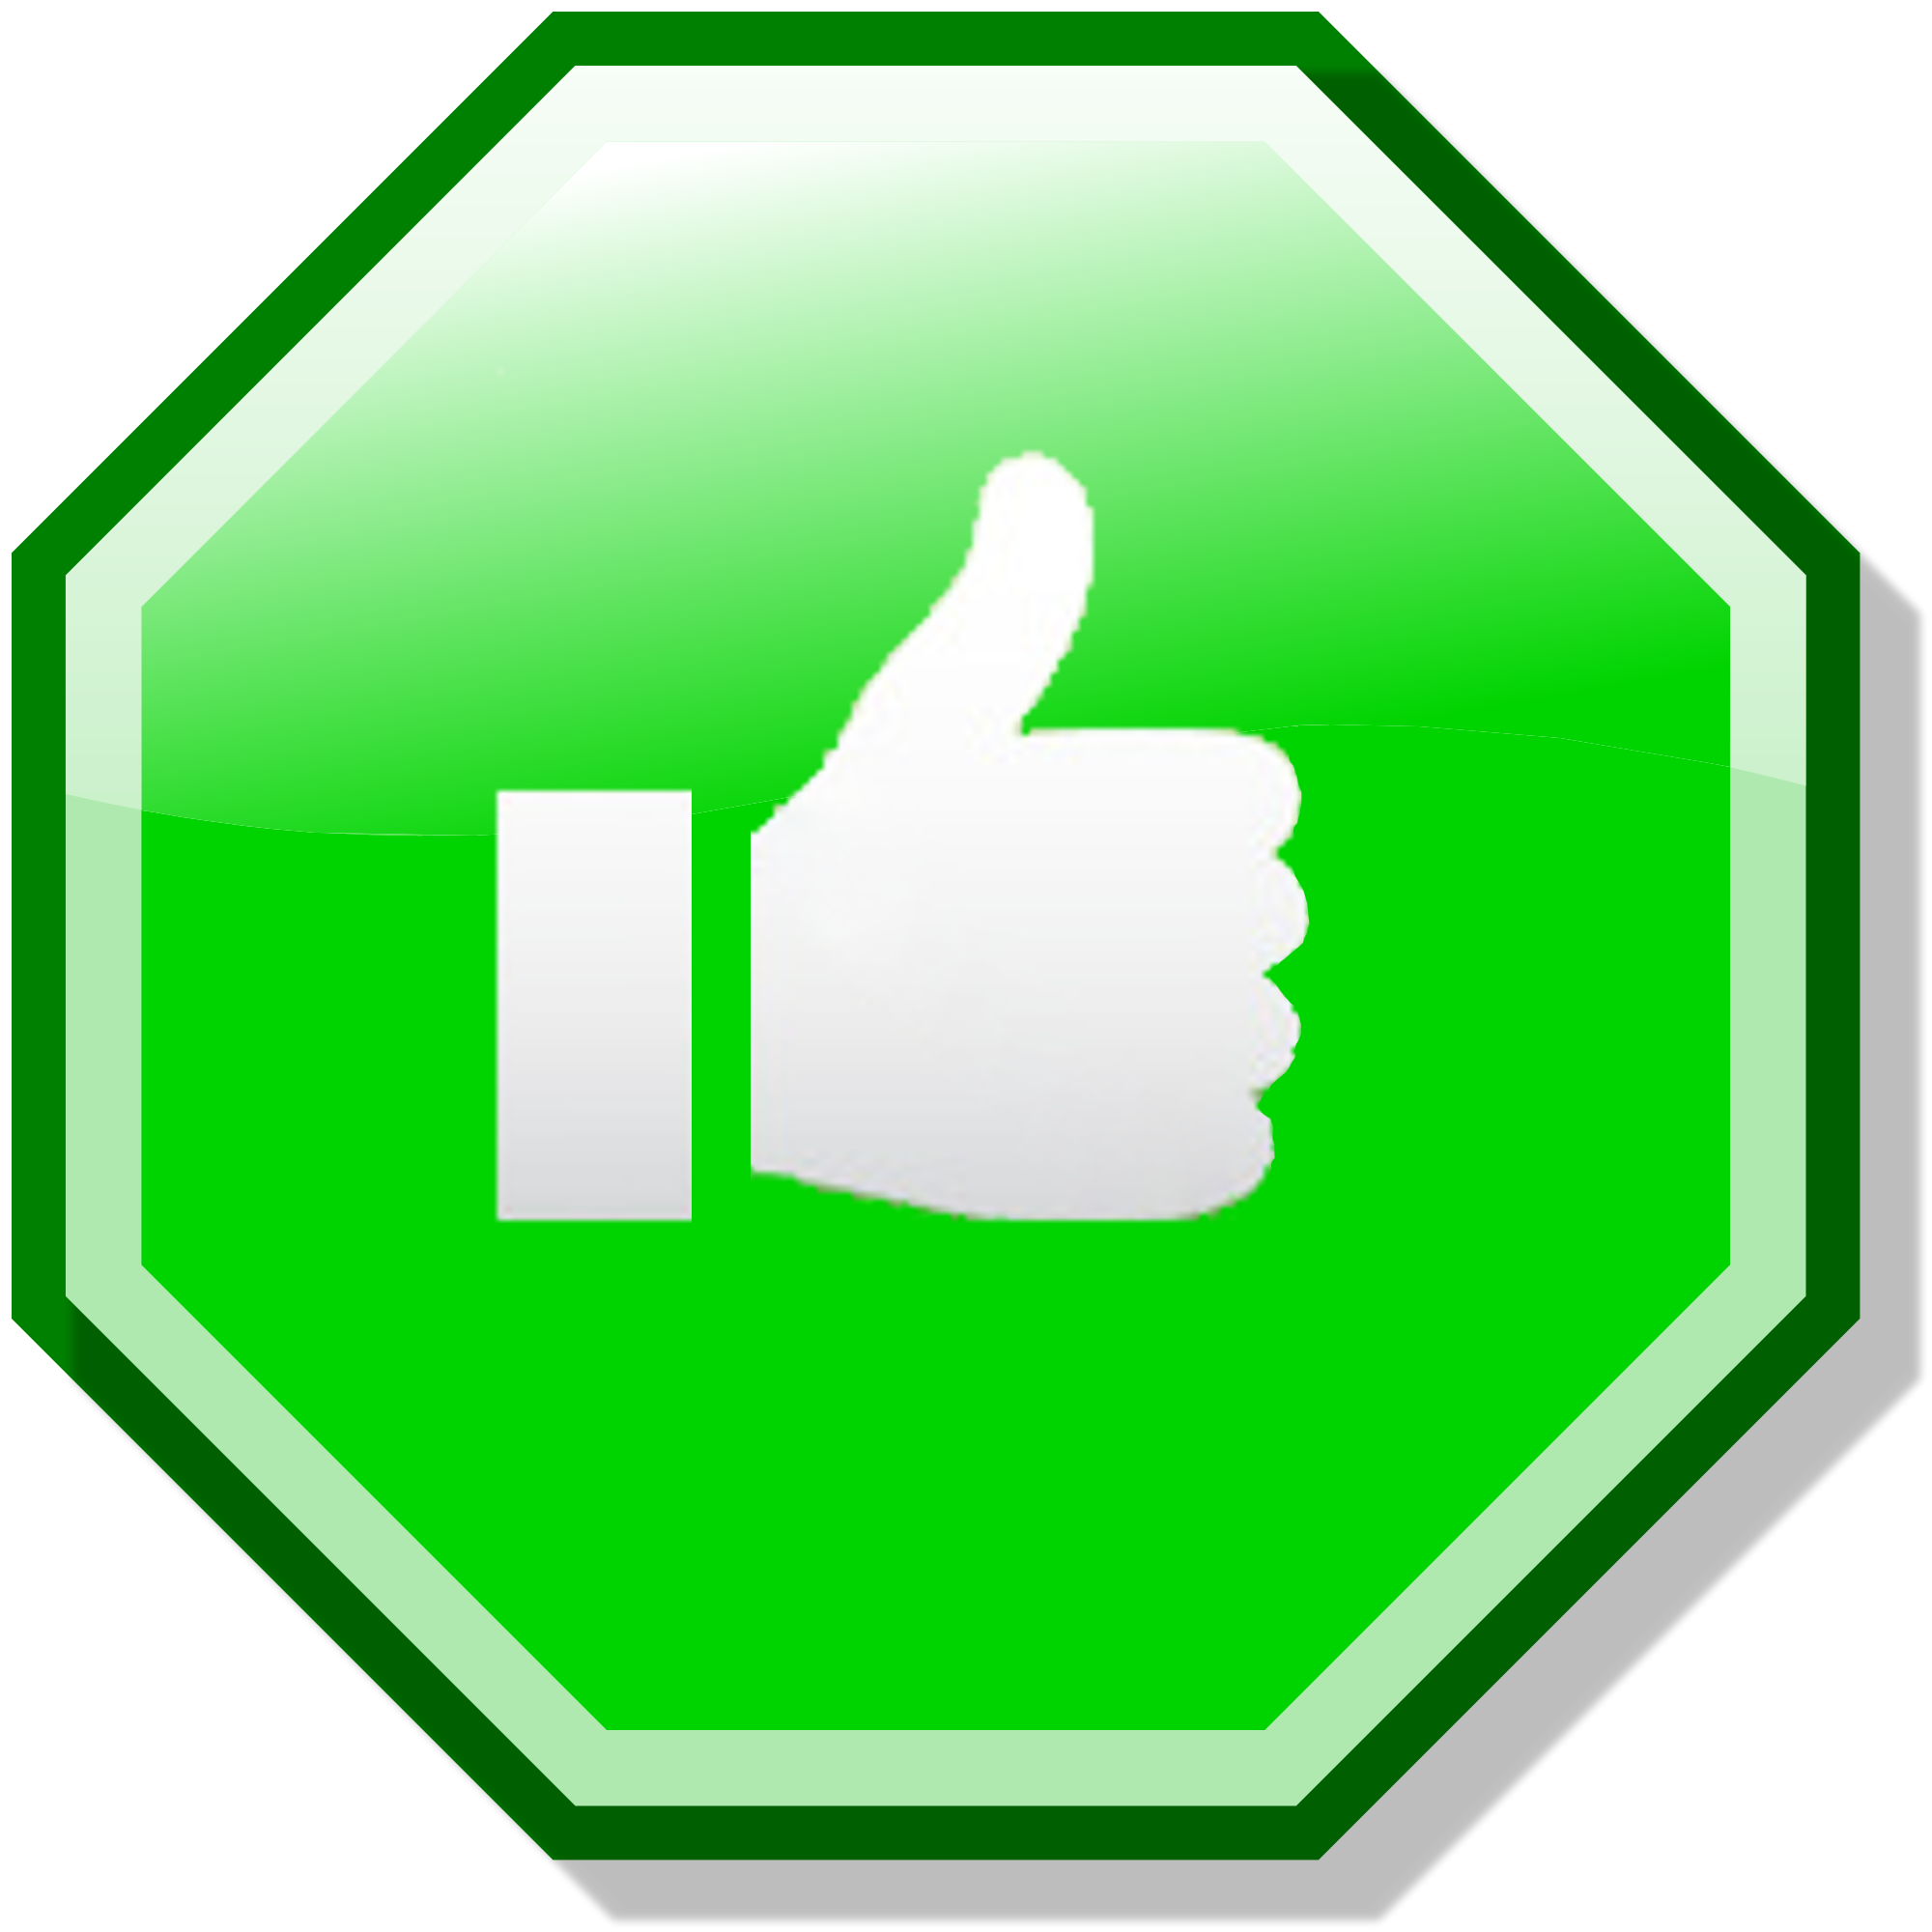 Green,Finger,Gesture,Thumb,Hand,Icon,Sign,Symbol,Signage